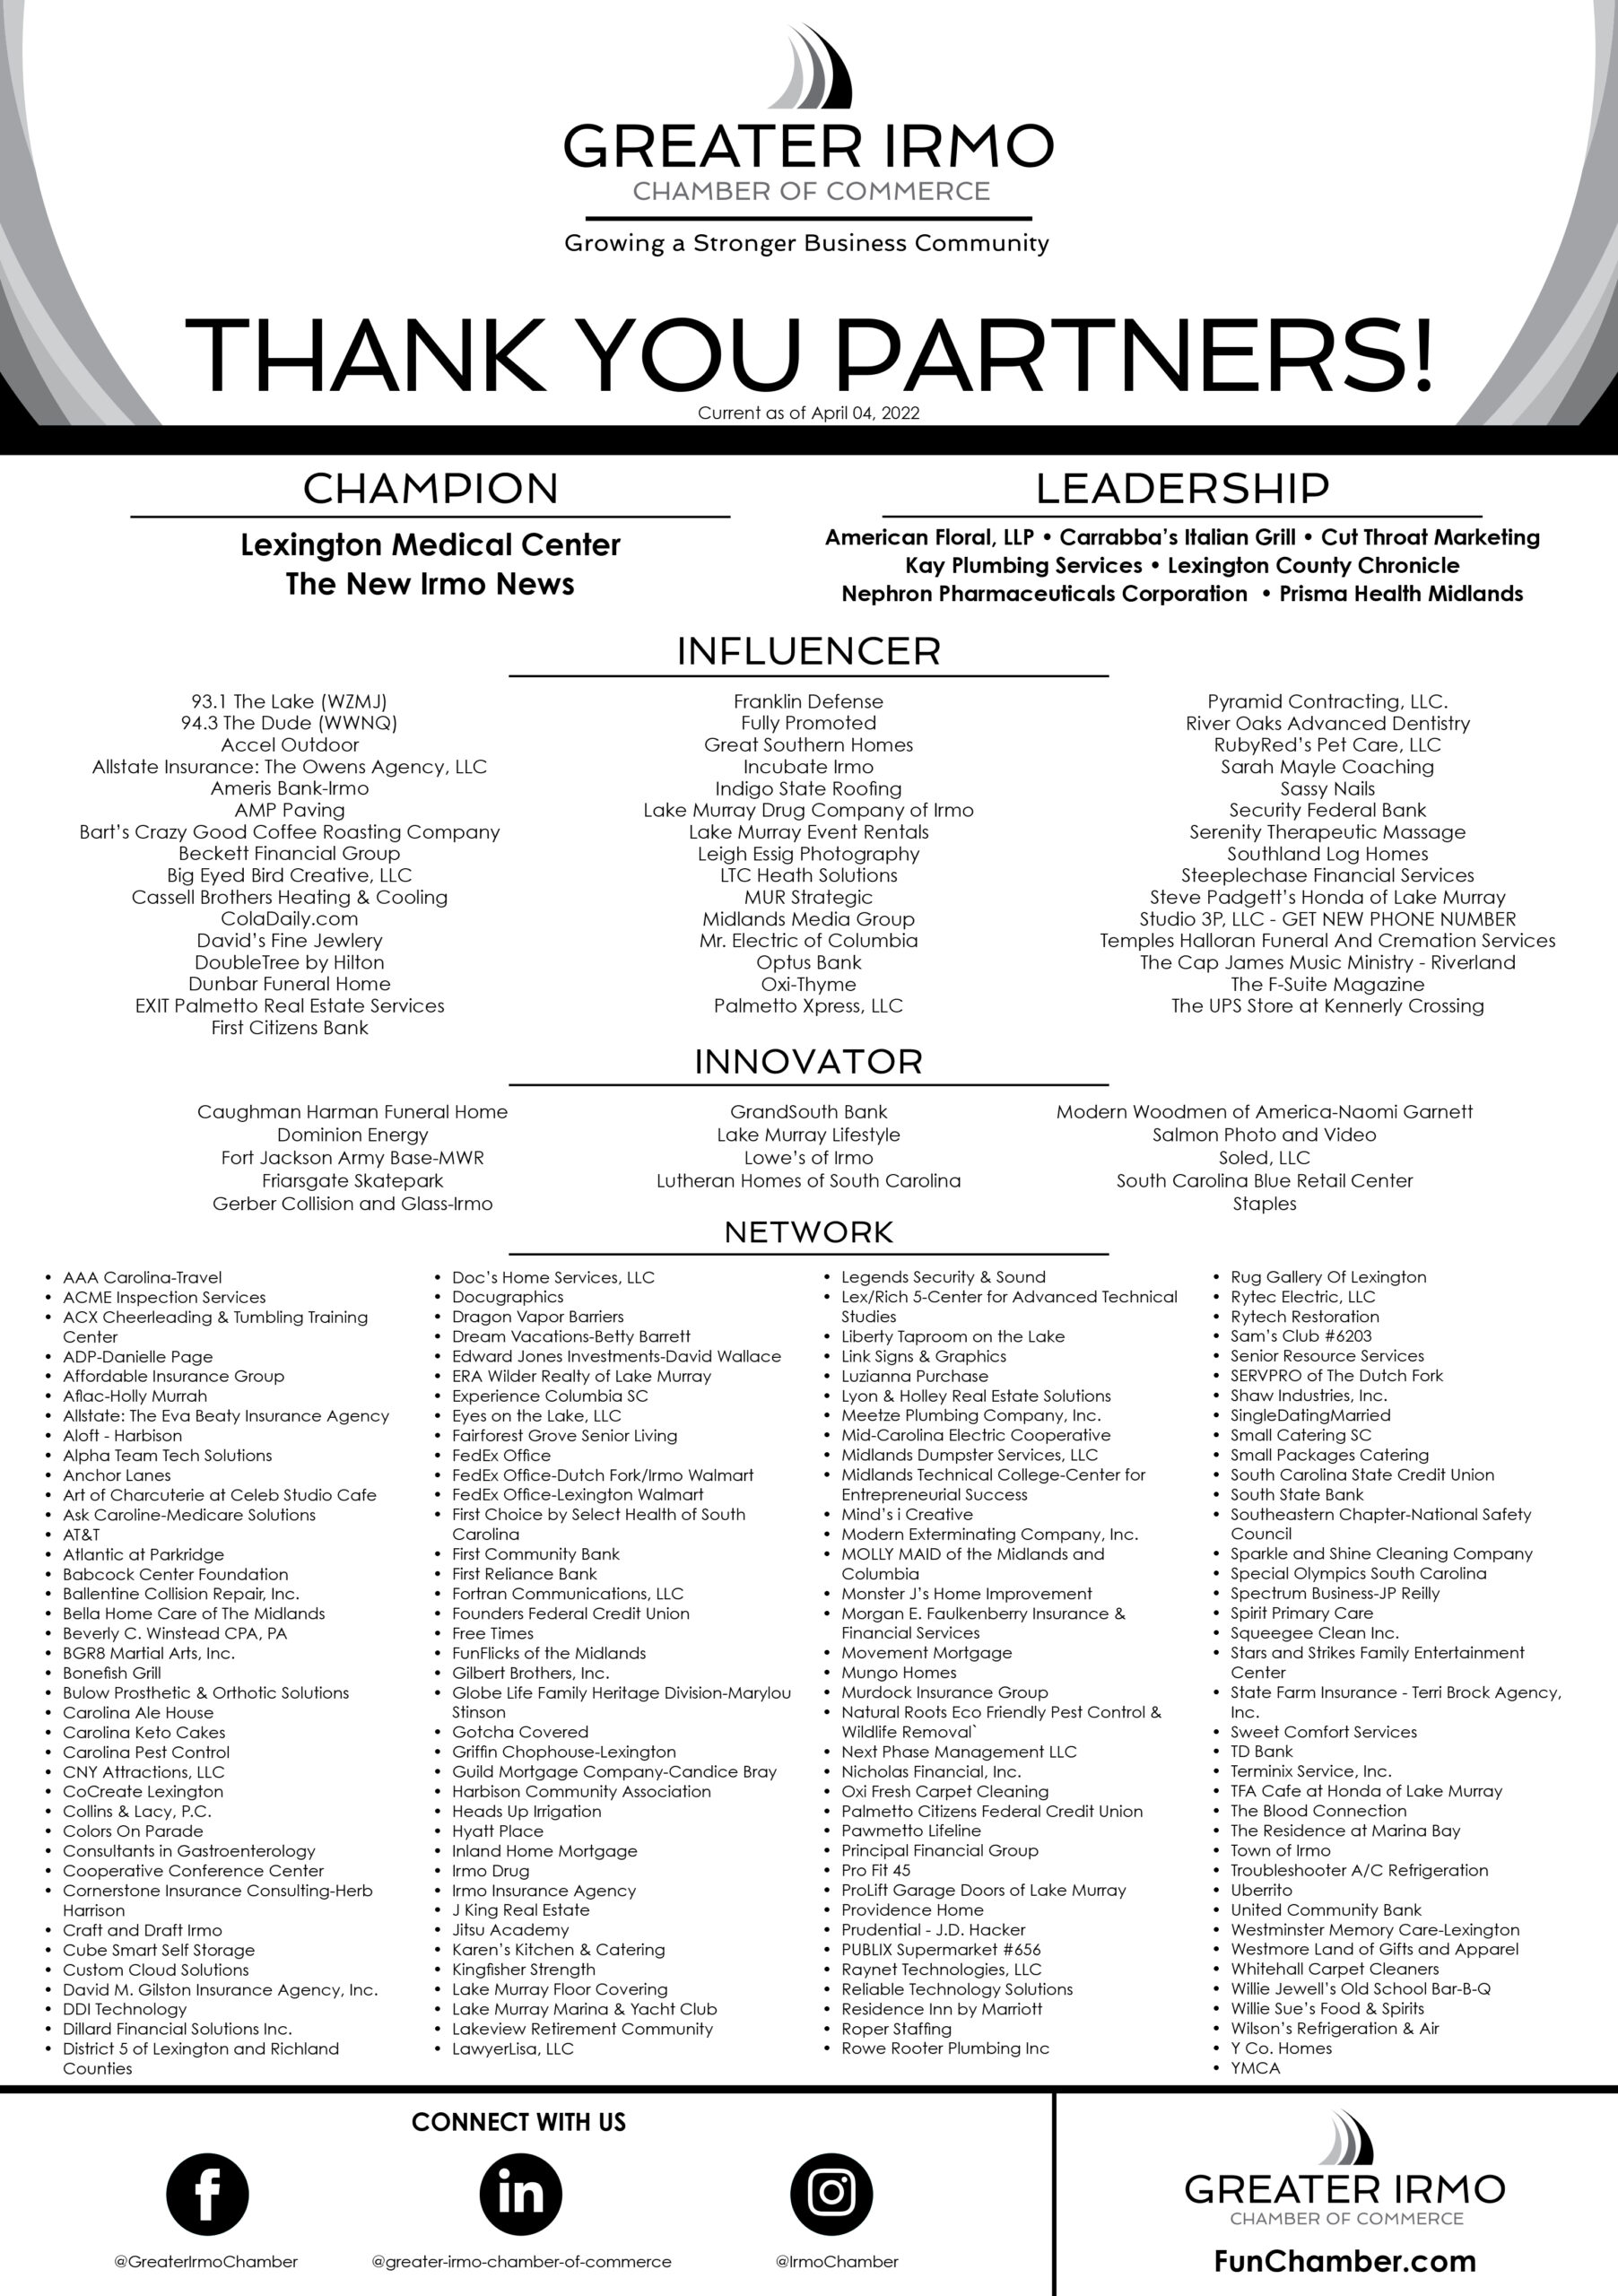 Thank you Feature Partners!